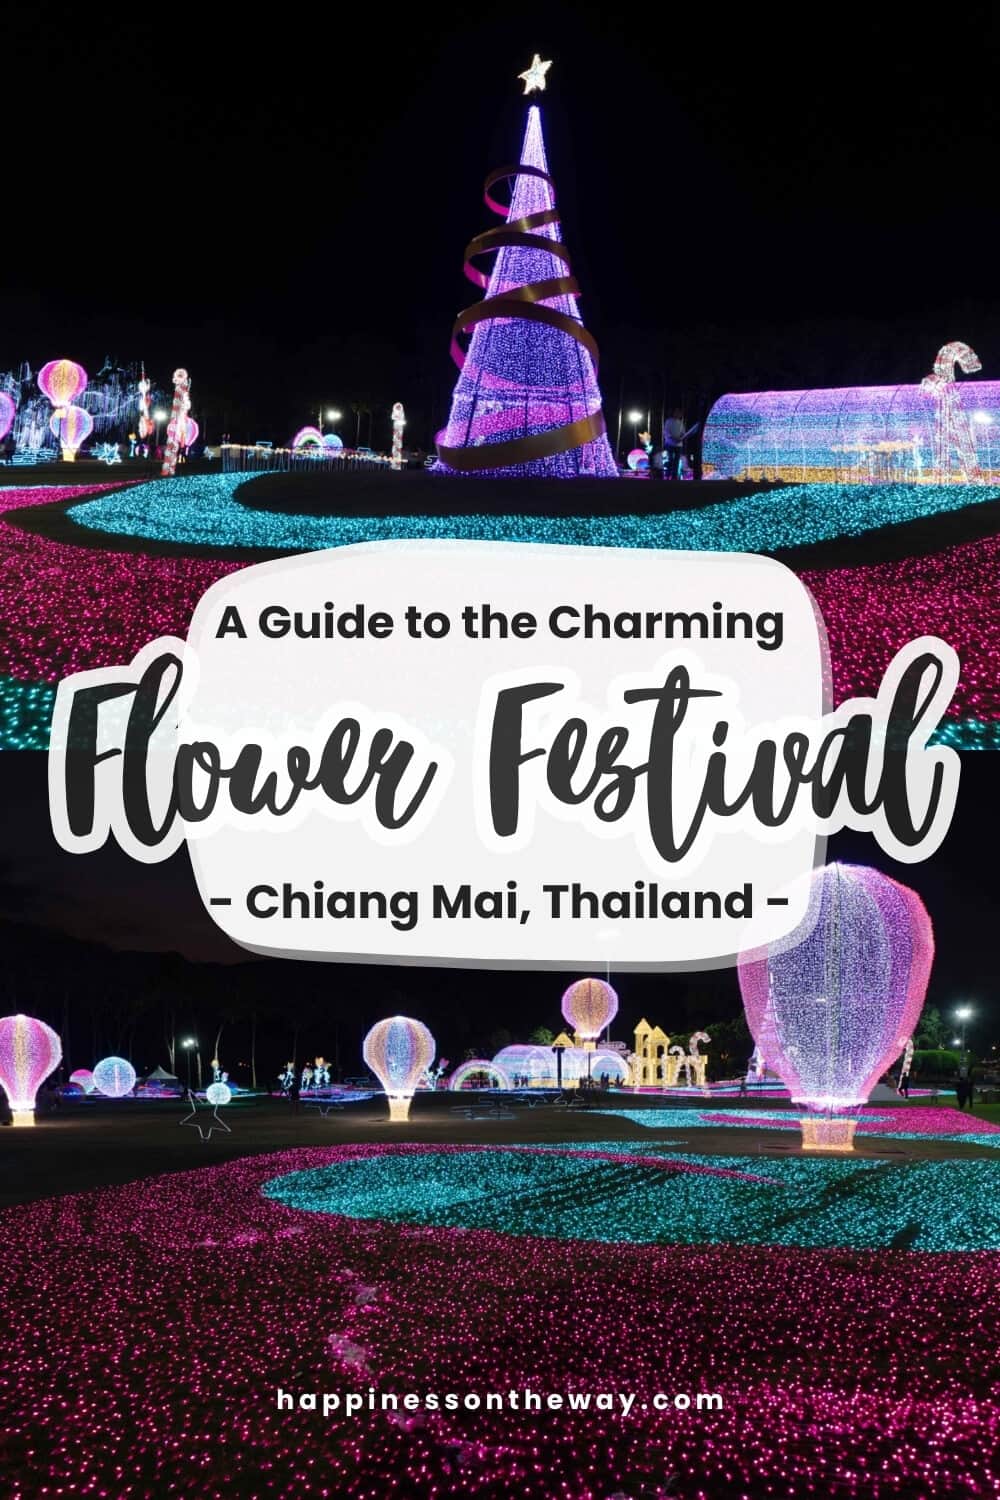 Charming Chiang Mai Flower Festival is a massive illuminated flower festival in Chiang Mai during December 15 to January 1 every year.